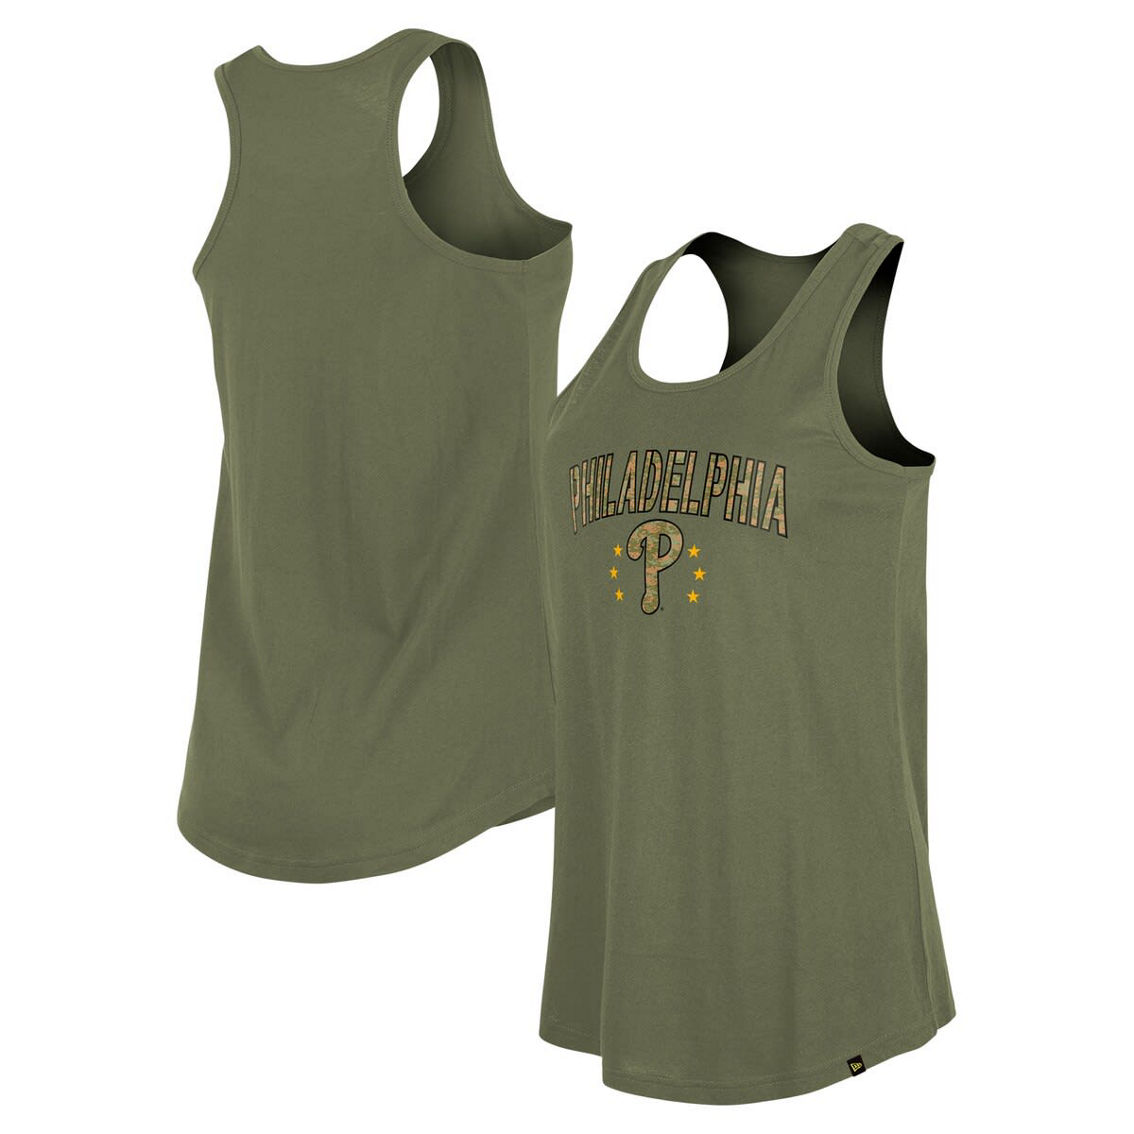 New Era Women's Olive Philadelphia Phillies Armed Forces Day Tank Top - Image 2 of 4